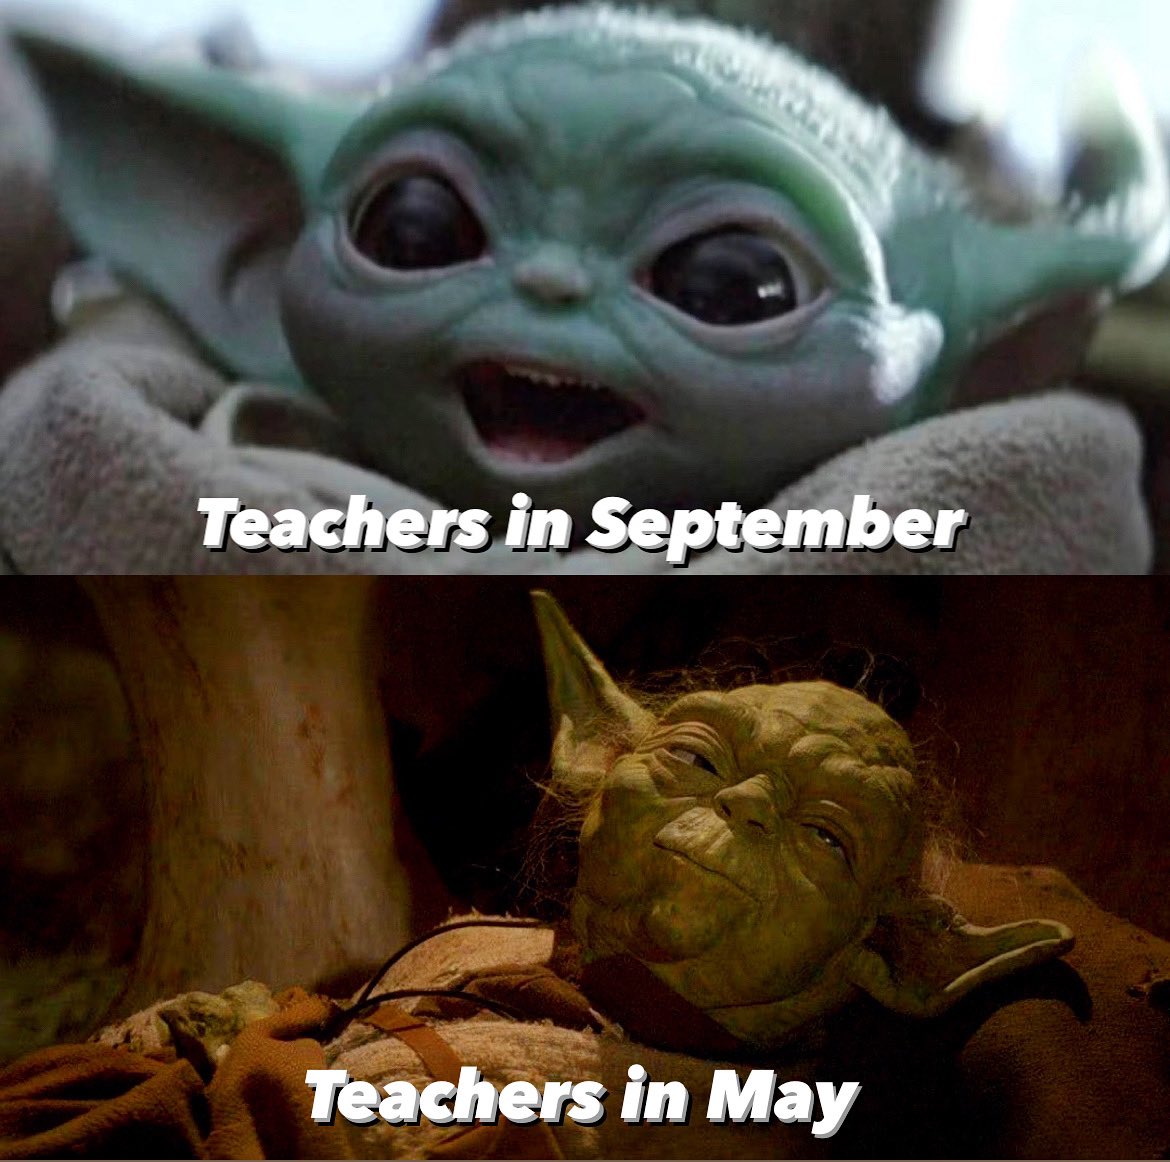 Hang in there friends; we’re almost there! Thanks for all that you’ve done this year to improve the lives of your students! #starwars #imagineeringed #teacherappreciationweek #teacherappreciation #teachers #teachersfollowteachers